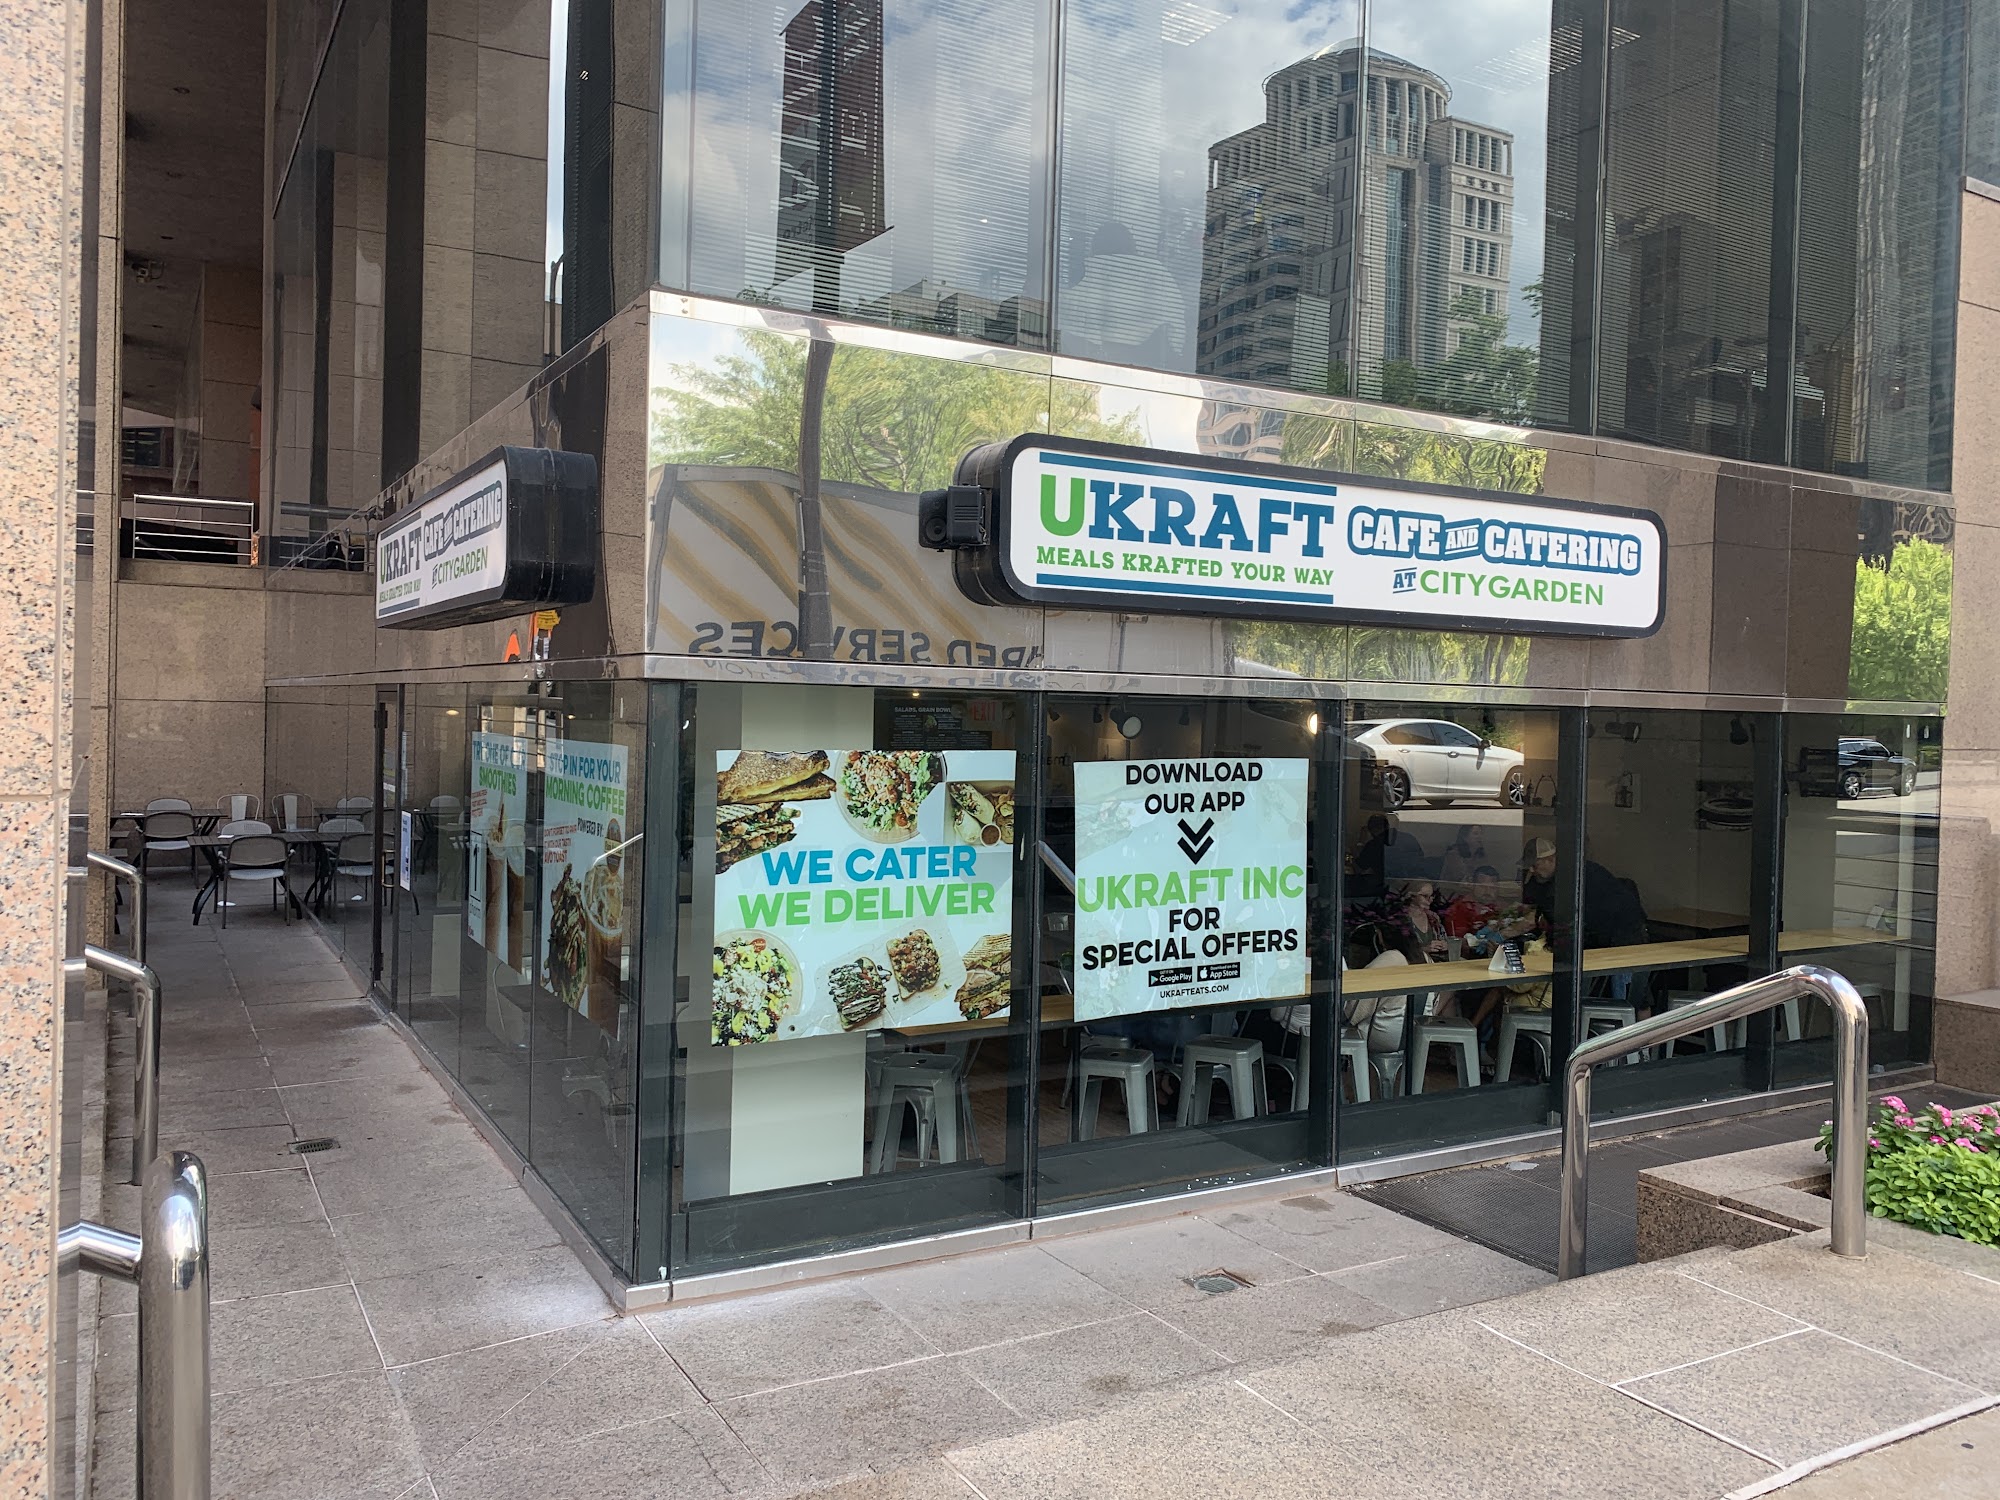 UKRAFT Cafe & Catering - Downtown, City Garden